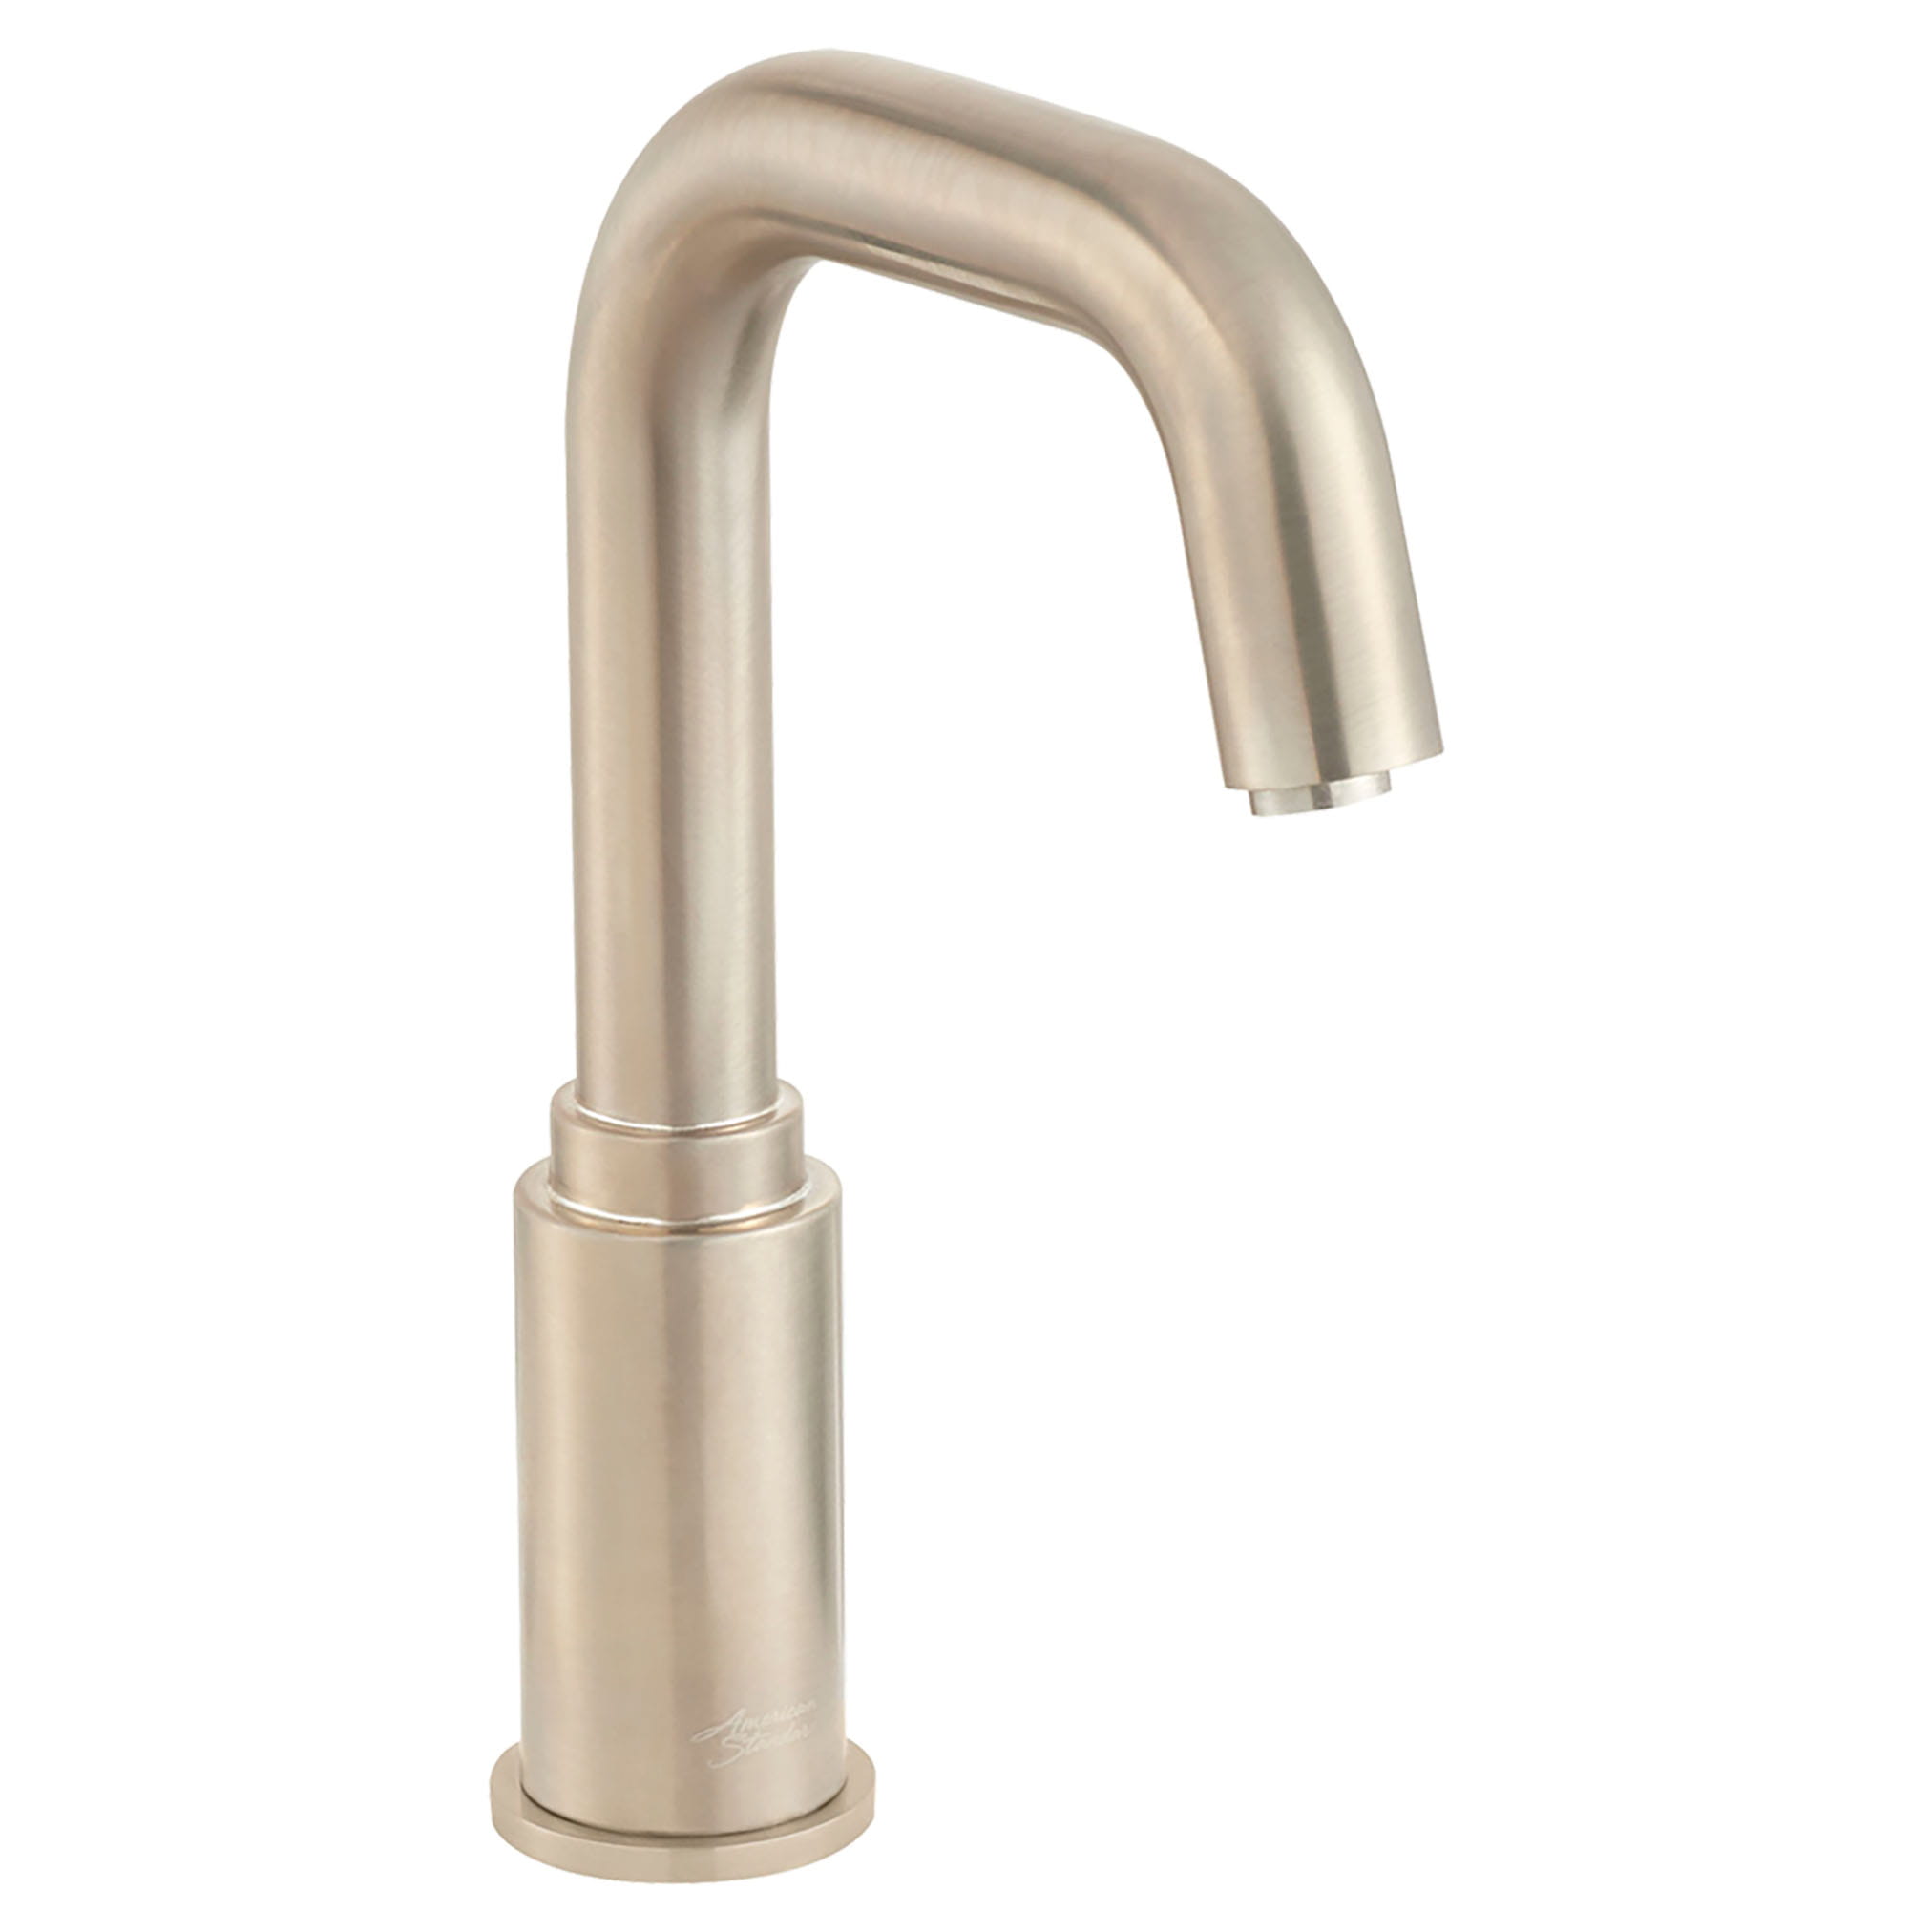 Serin® Touchless Faucet, Base Model, 1.5 gpm/5.7 Lpm